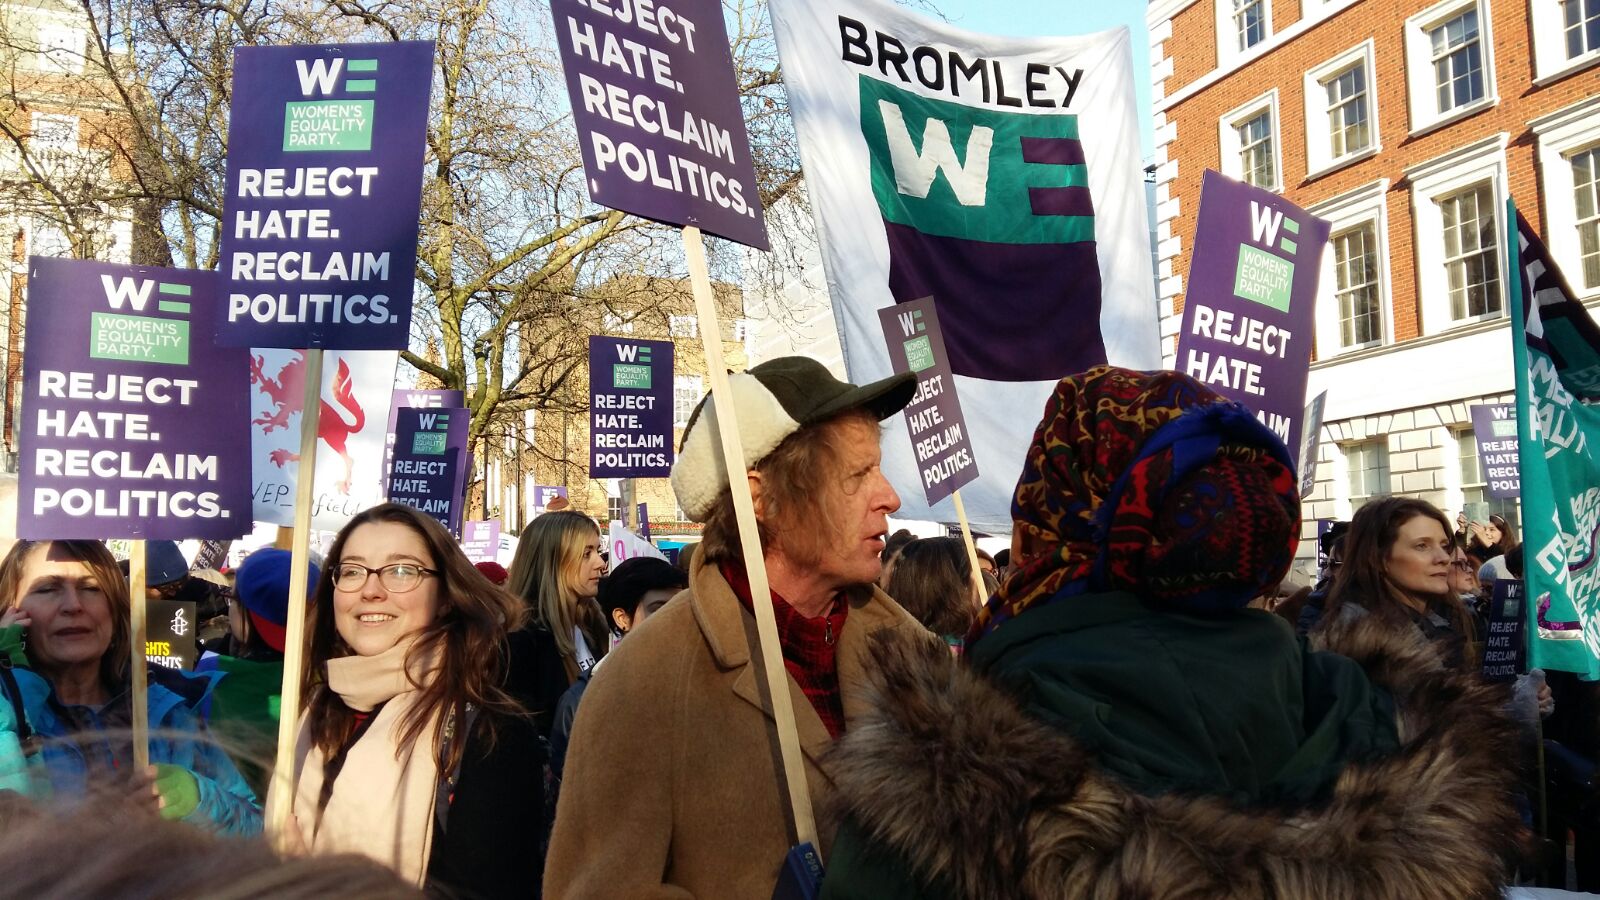 Grayson Perry marched alongside the Womens Equality Party